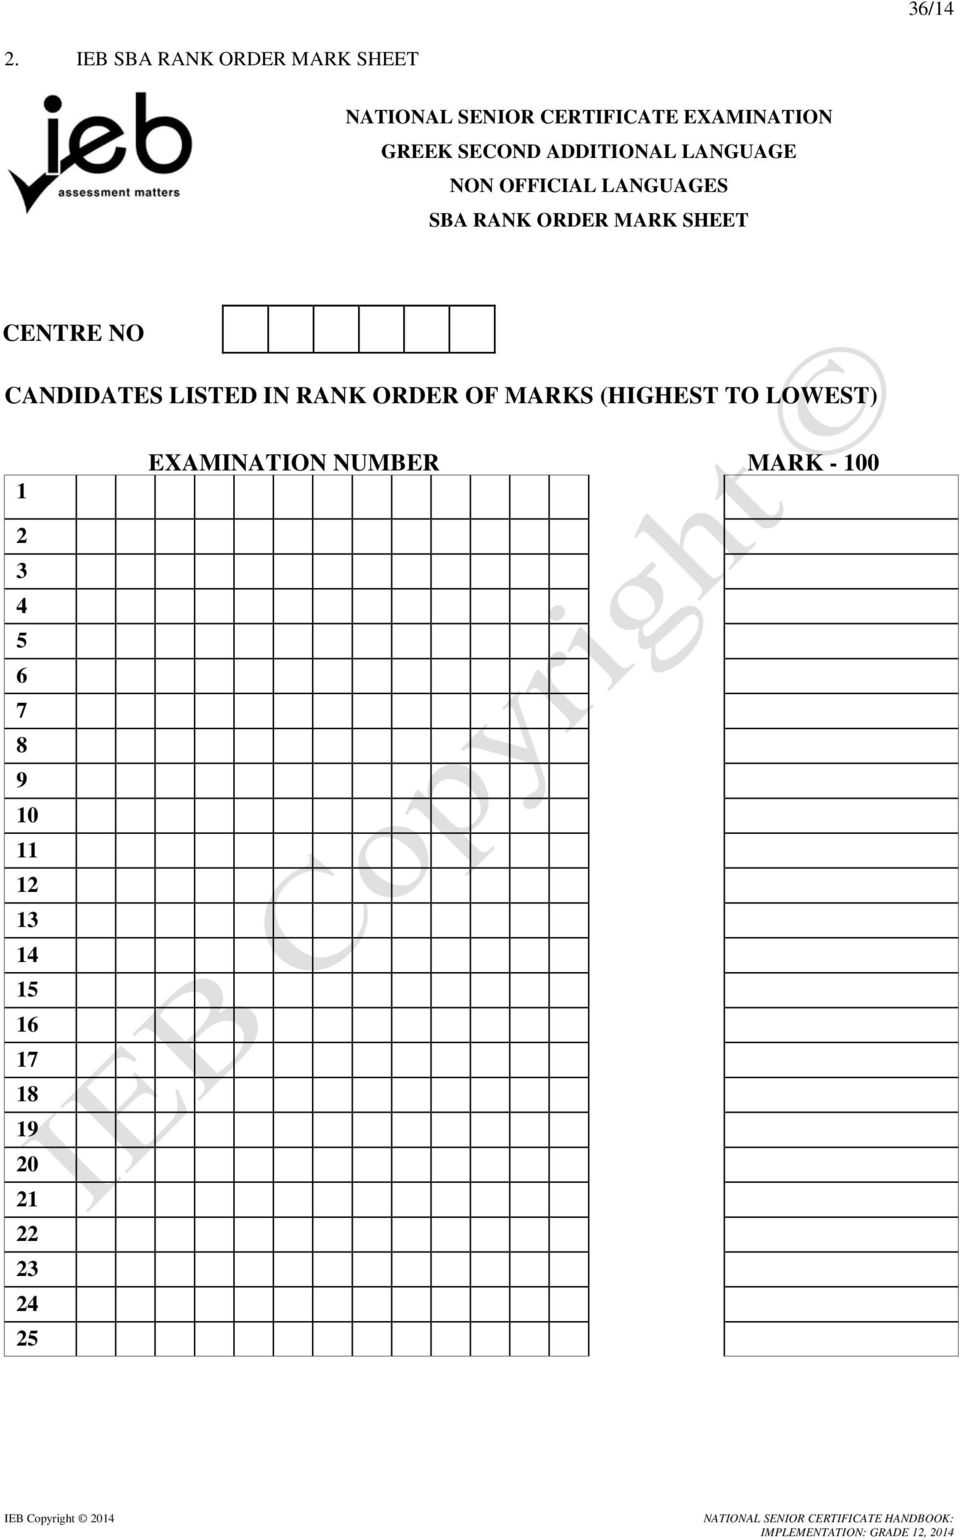 SECOND ADDITIONAL LANGUAGE NON OFFICIAL LANGUAGES SBA RANK ORDER MARK SHEET